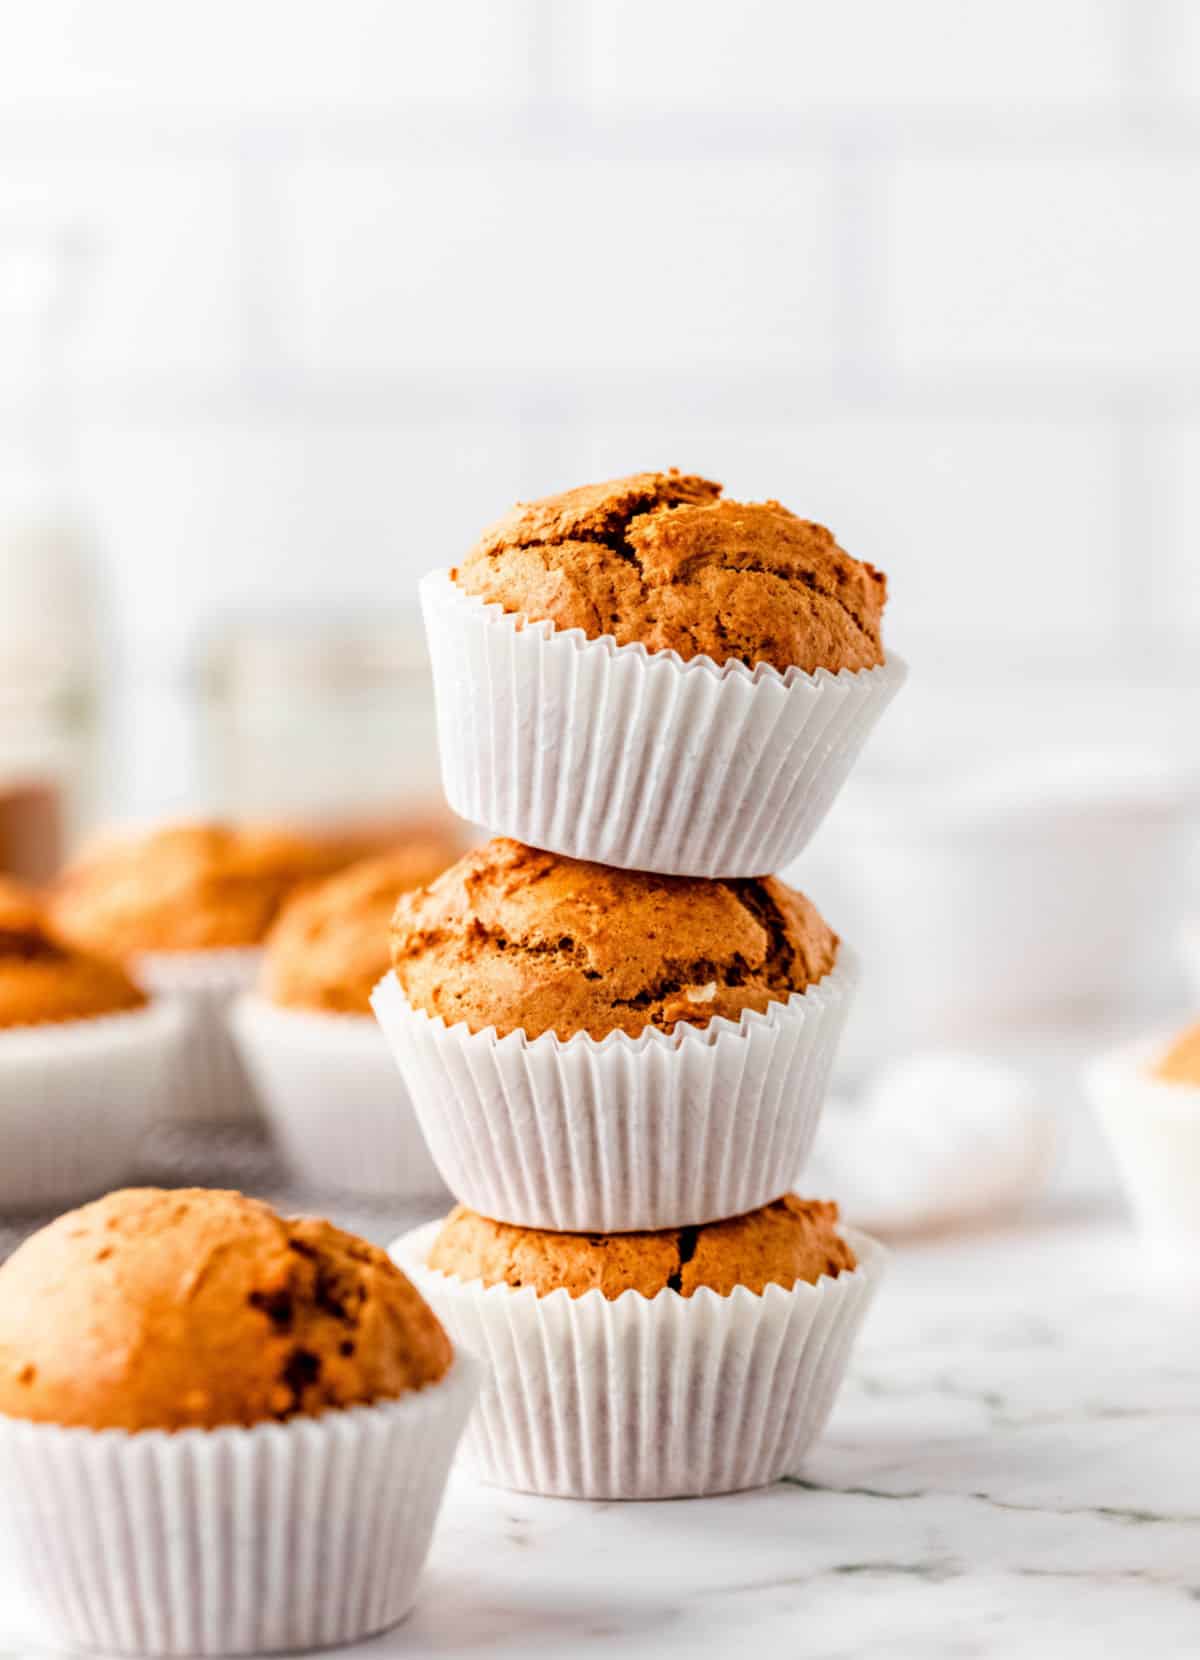 Stack of three pumpkin muffins on a white surface and background with more muffins around.